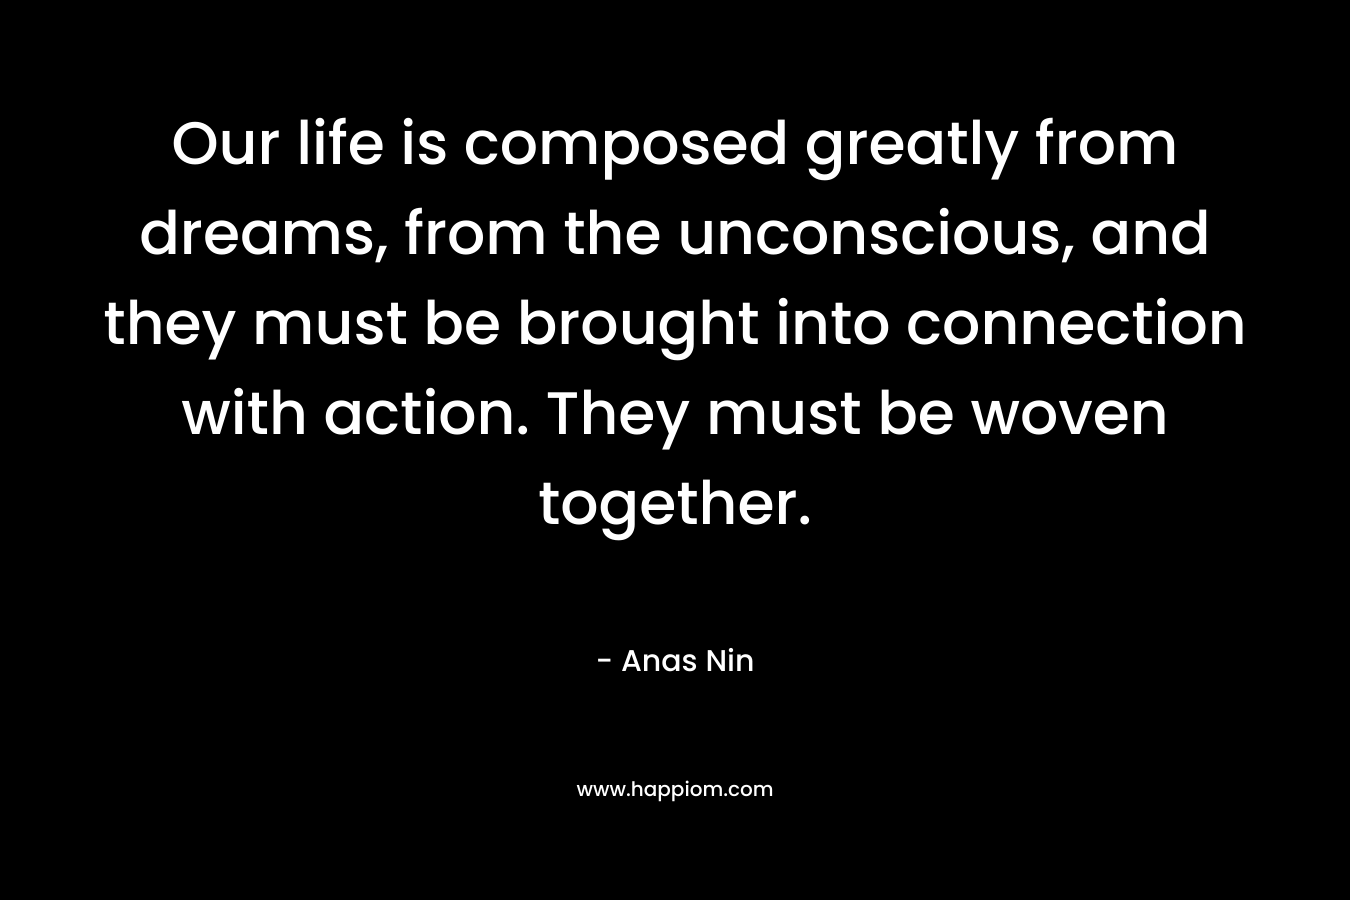 Our life is composed greatly from dreams, from the unconscious, and they must be brought into connection with action. They must be woven together. 